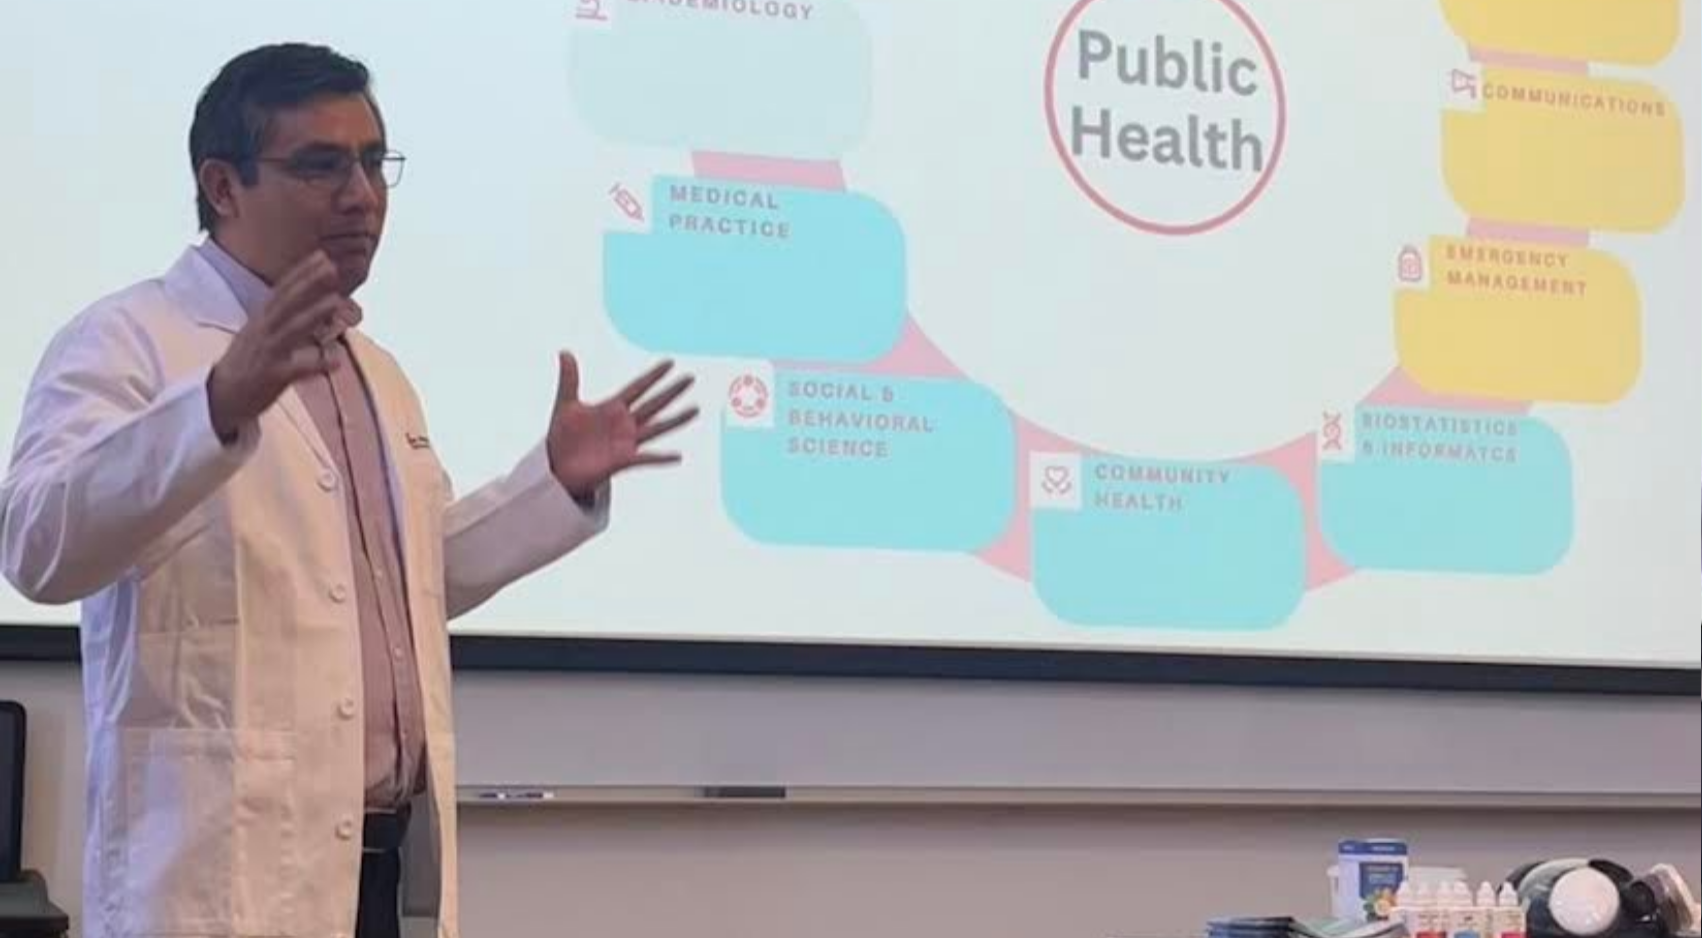 Miguel Zavala (right) led a degree workshop session around public health alongside Kai-Chung Cheng, assistant professor of environmental health, at SDSU Imperial Valley. (SDSU)